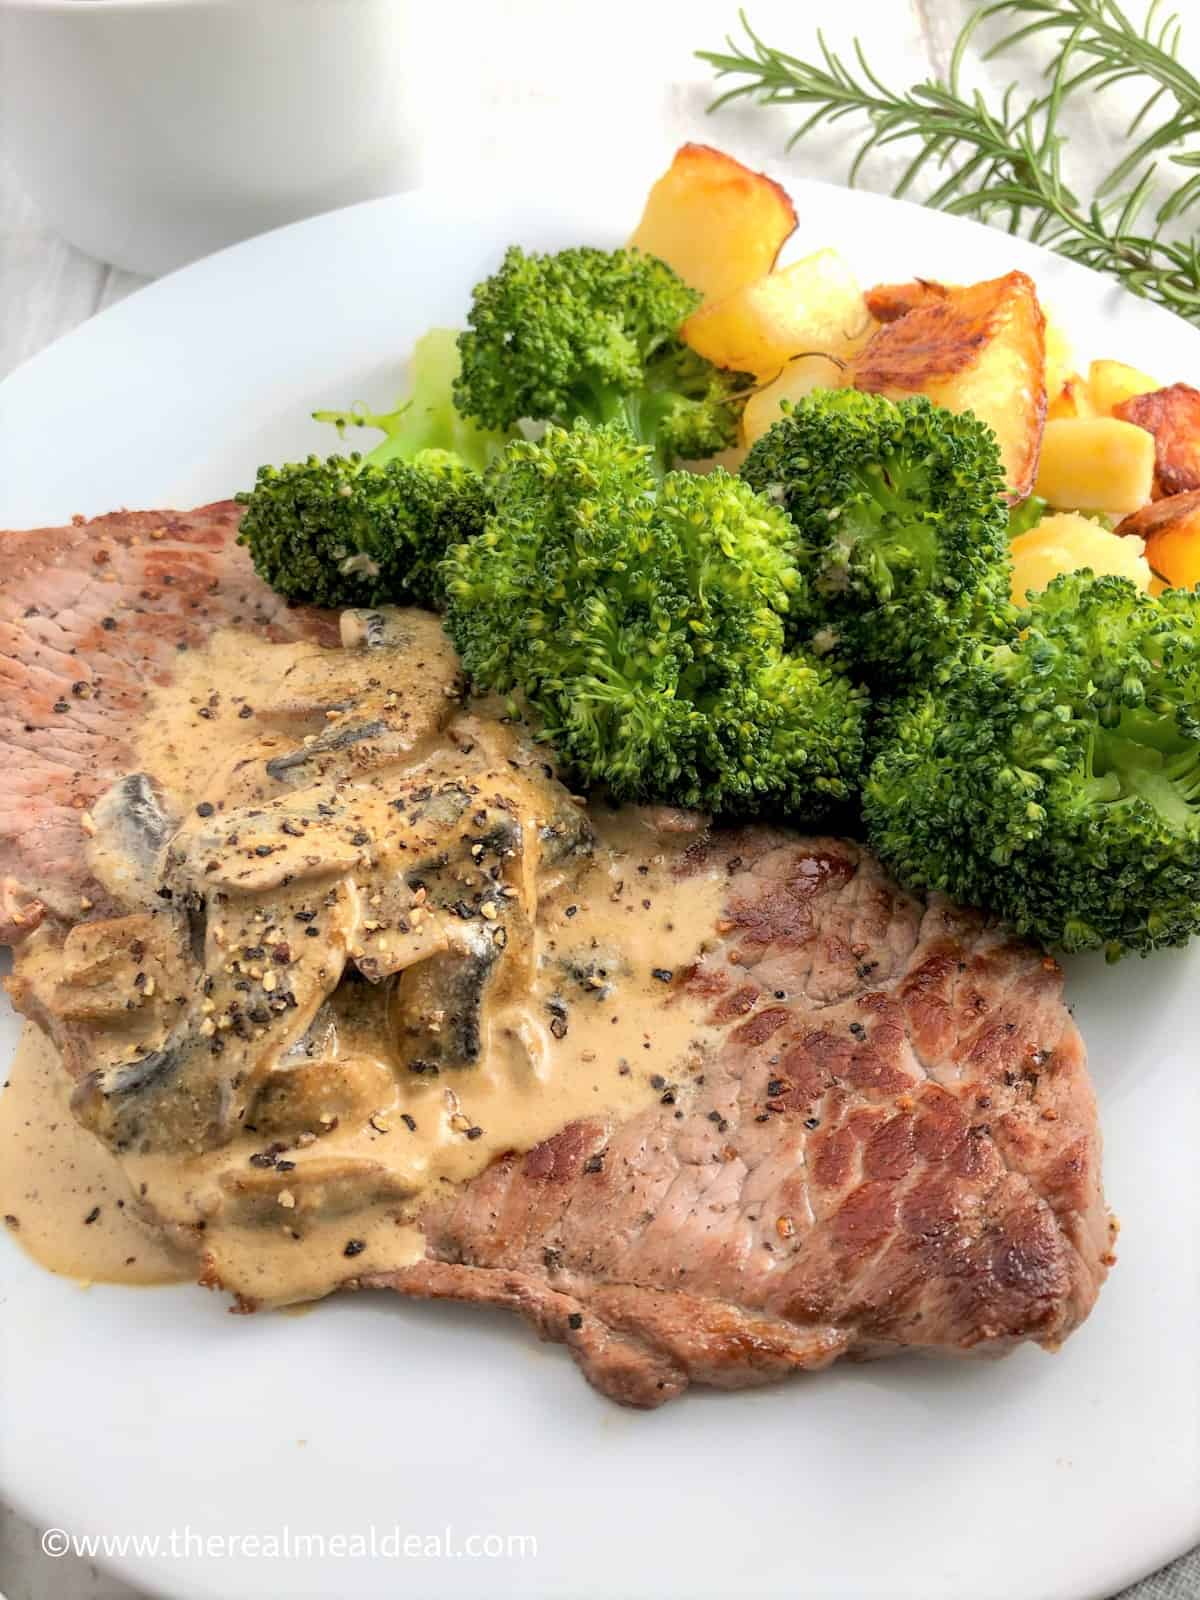 rose veal escalopes on plate with mushroom sauce and broccoli and roasted potatoes